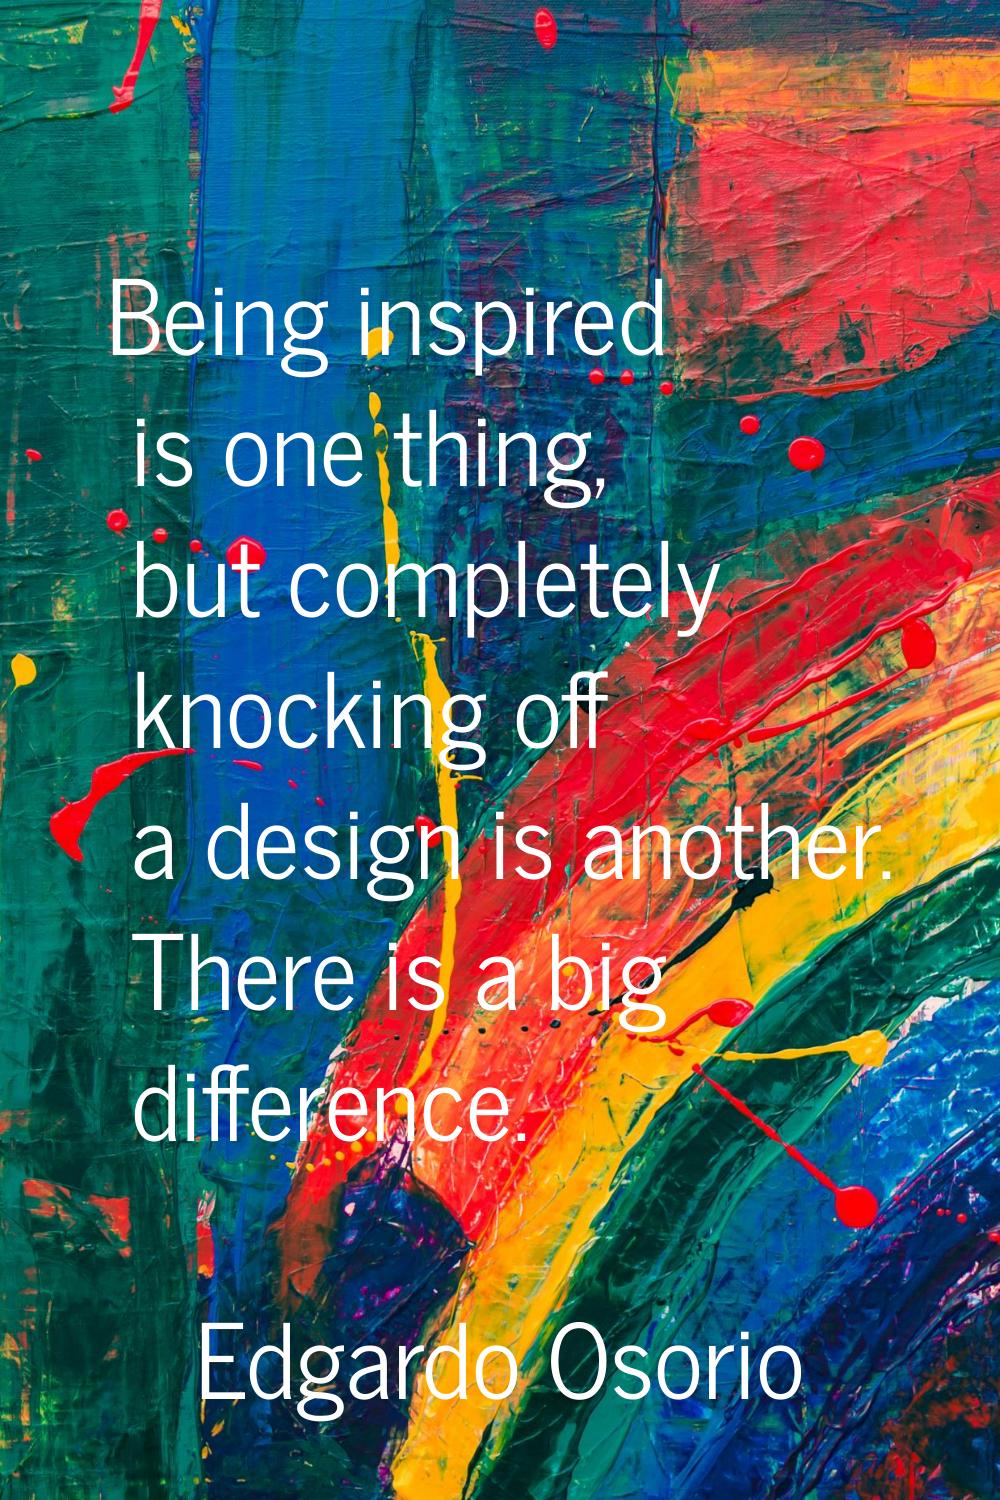 Being inspired is one thing, but completely knocking off a design is another. There is a big differ